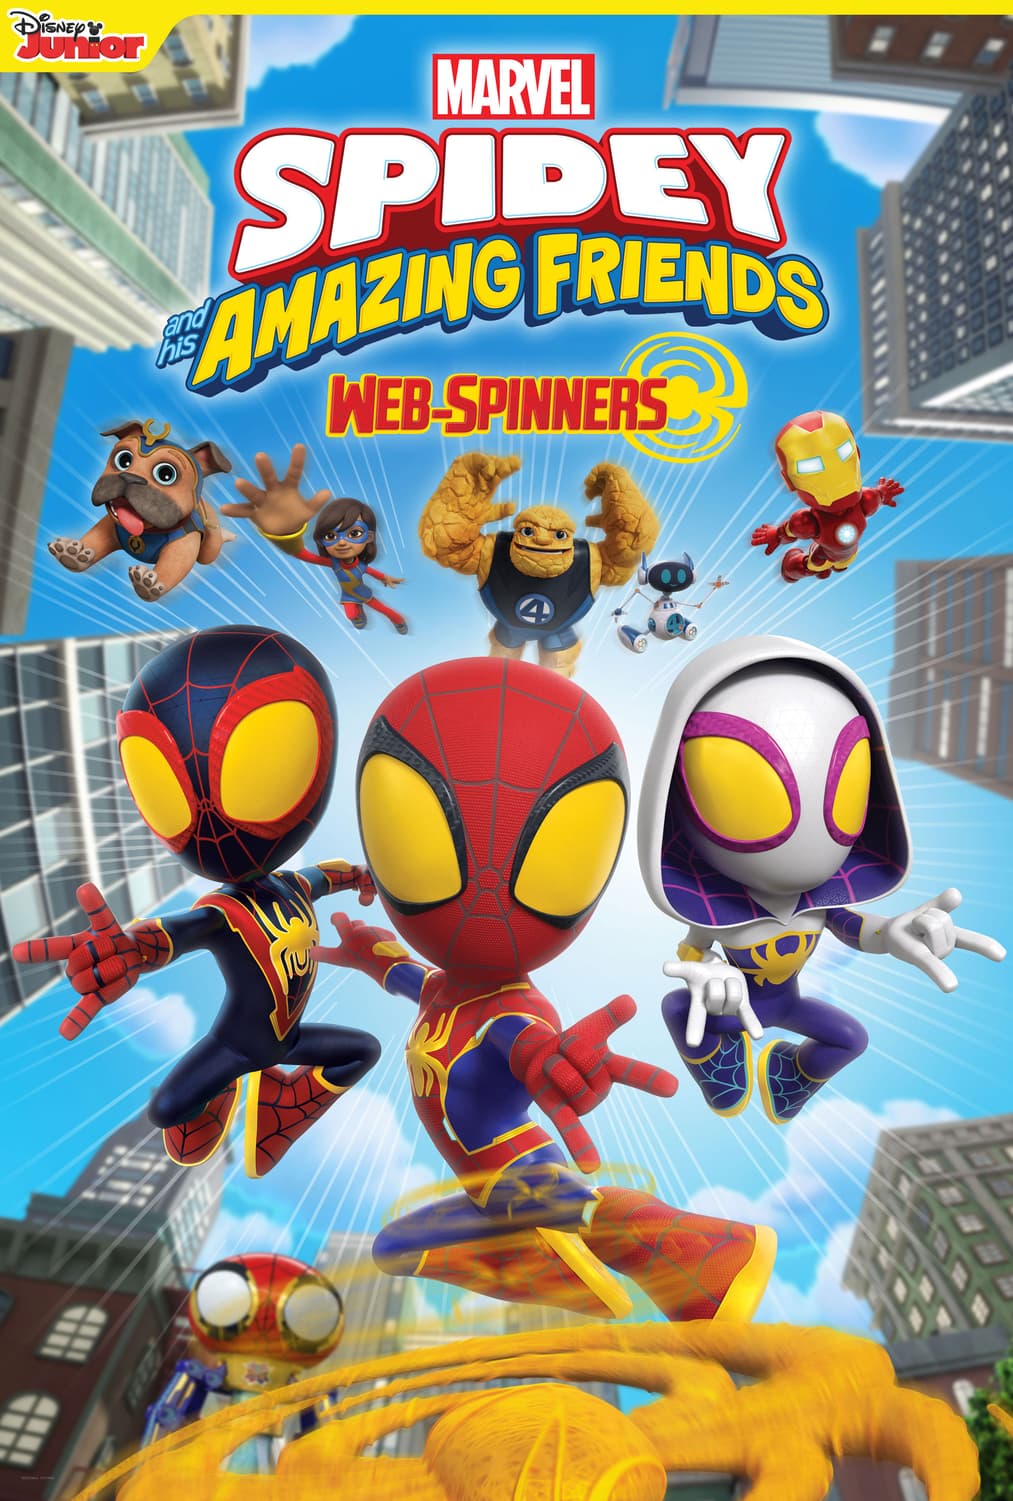 Spidey and His Amazing Friends - Web-Spinners